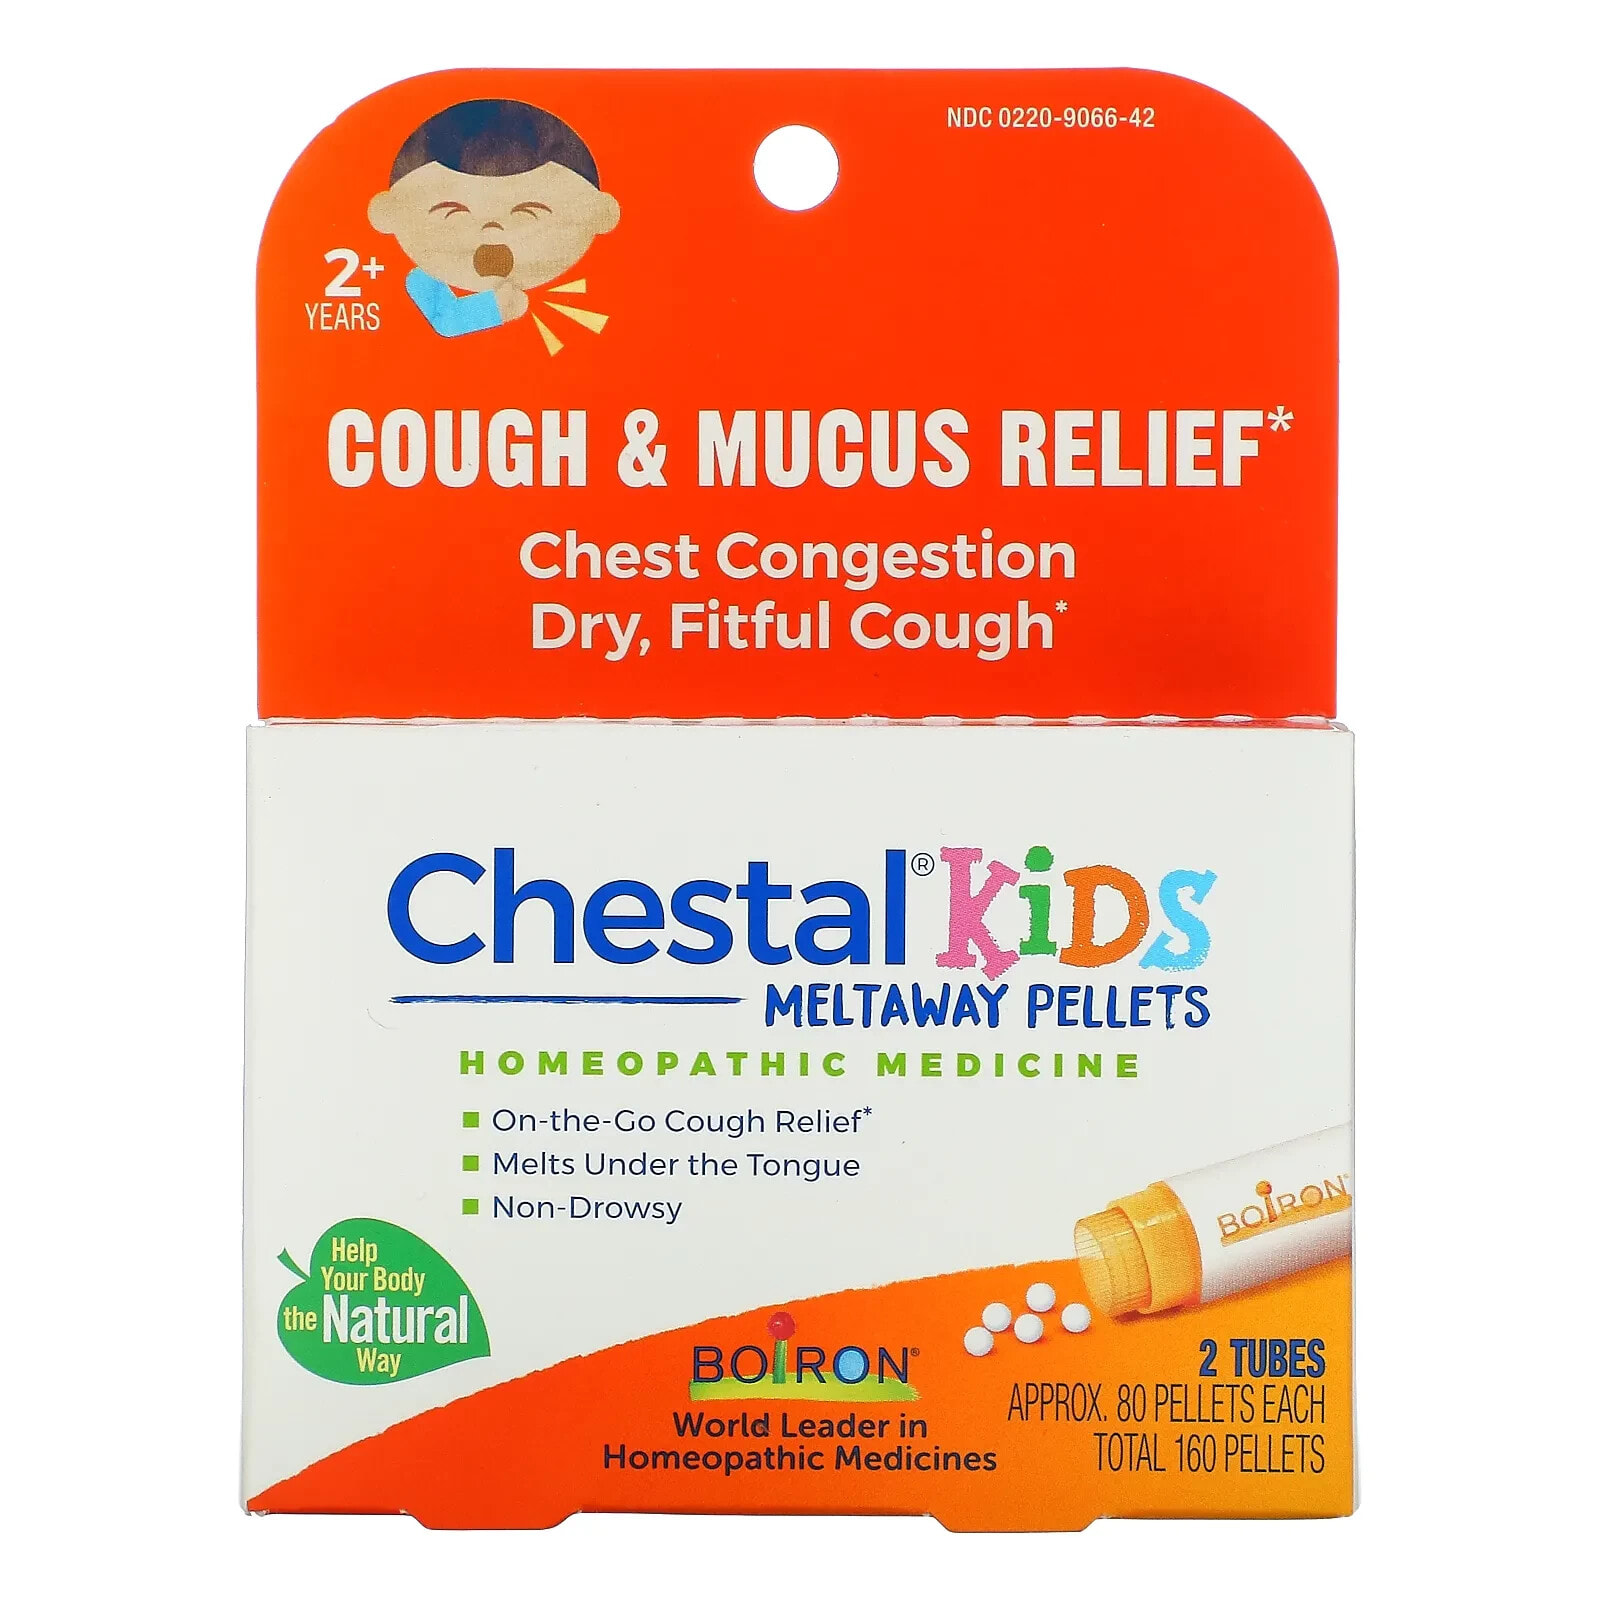 Chestal Kids Meltaway Pellets, Cough & Mucus Relief, 4+ Years, 2 Tubes, Approx. 80 Pellets Each